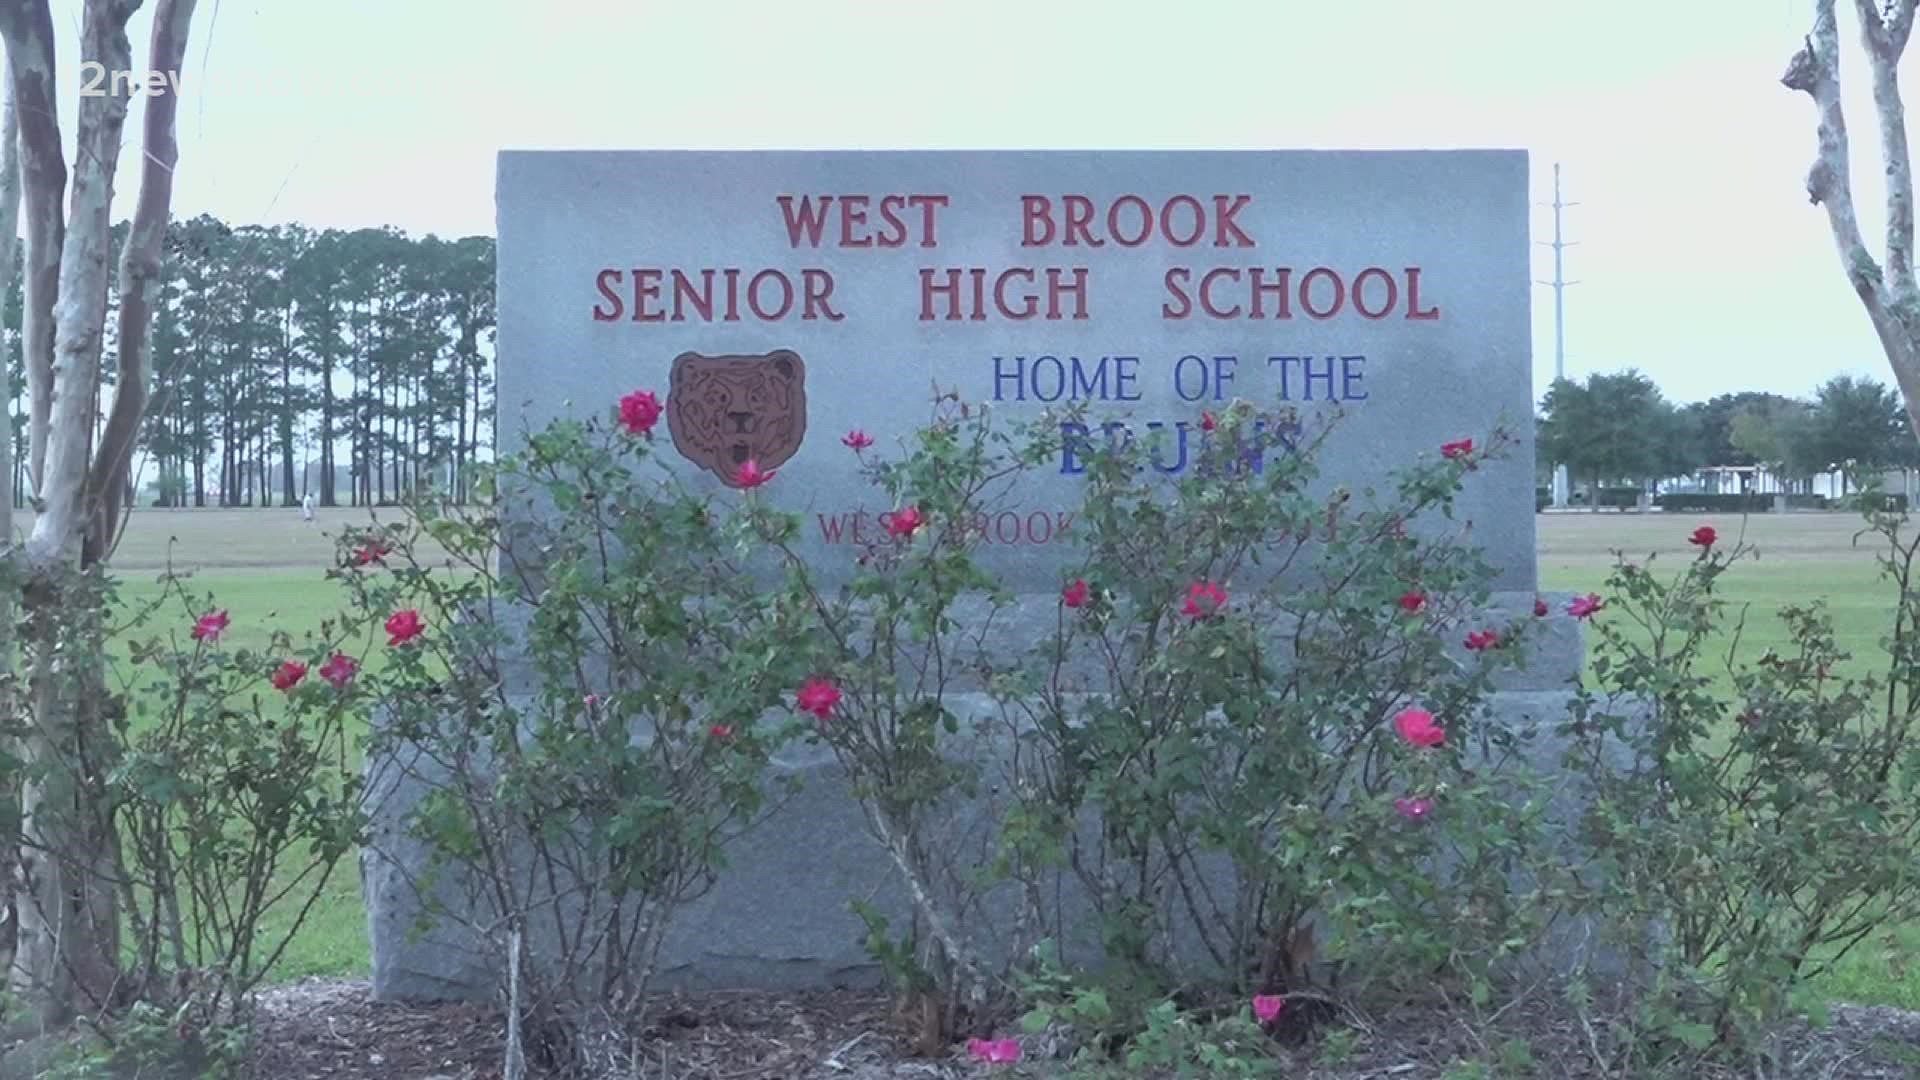 Beaumont ISD is investigating what led up to a fight in West Brook High School's cafeteria and caused an officer to diffuse the situation with pepper spray